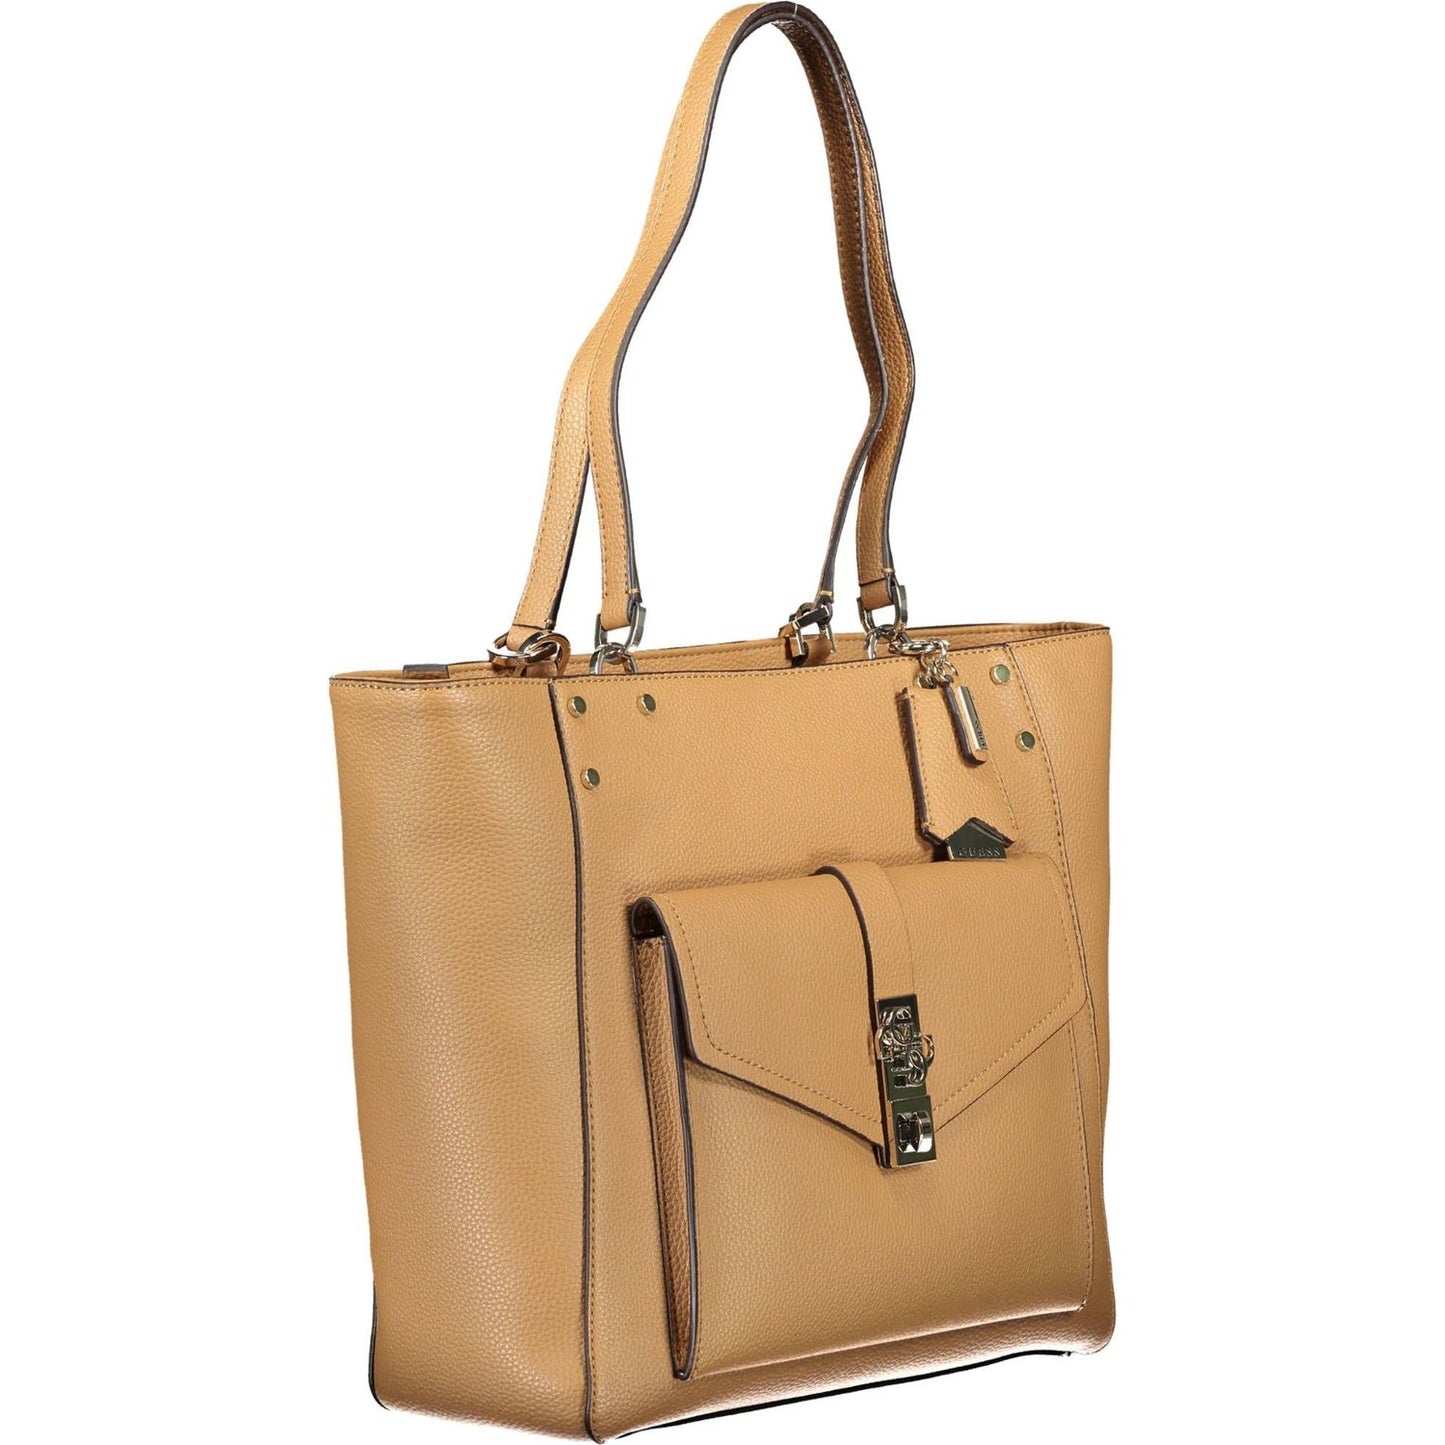 Guess Jeans Chic Brown Dual-Compartment Handbag chic-brown-dual-compartment-handbag